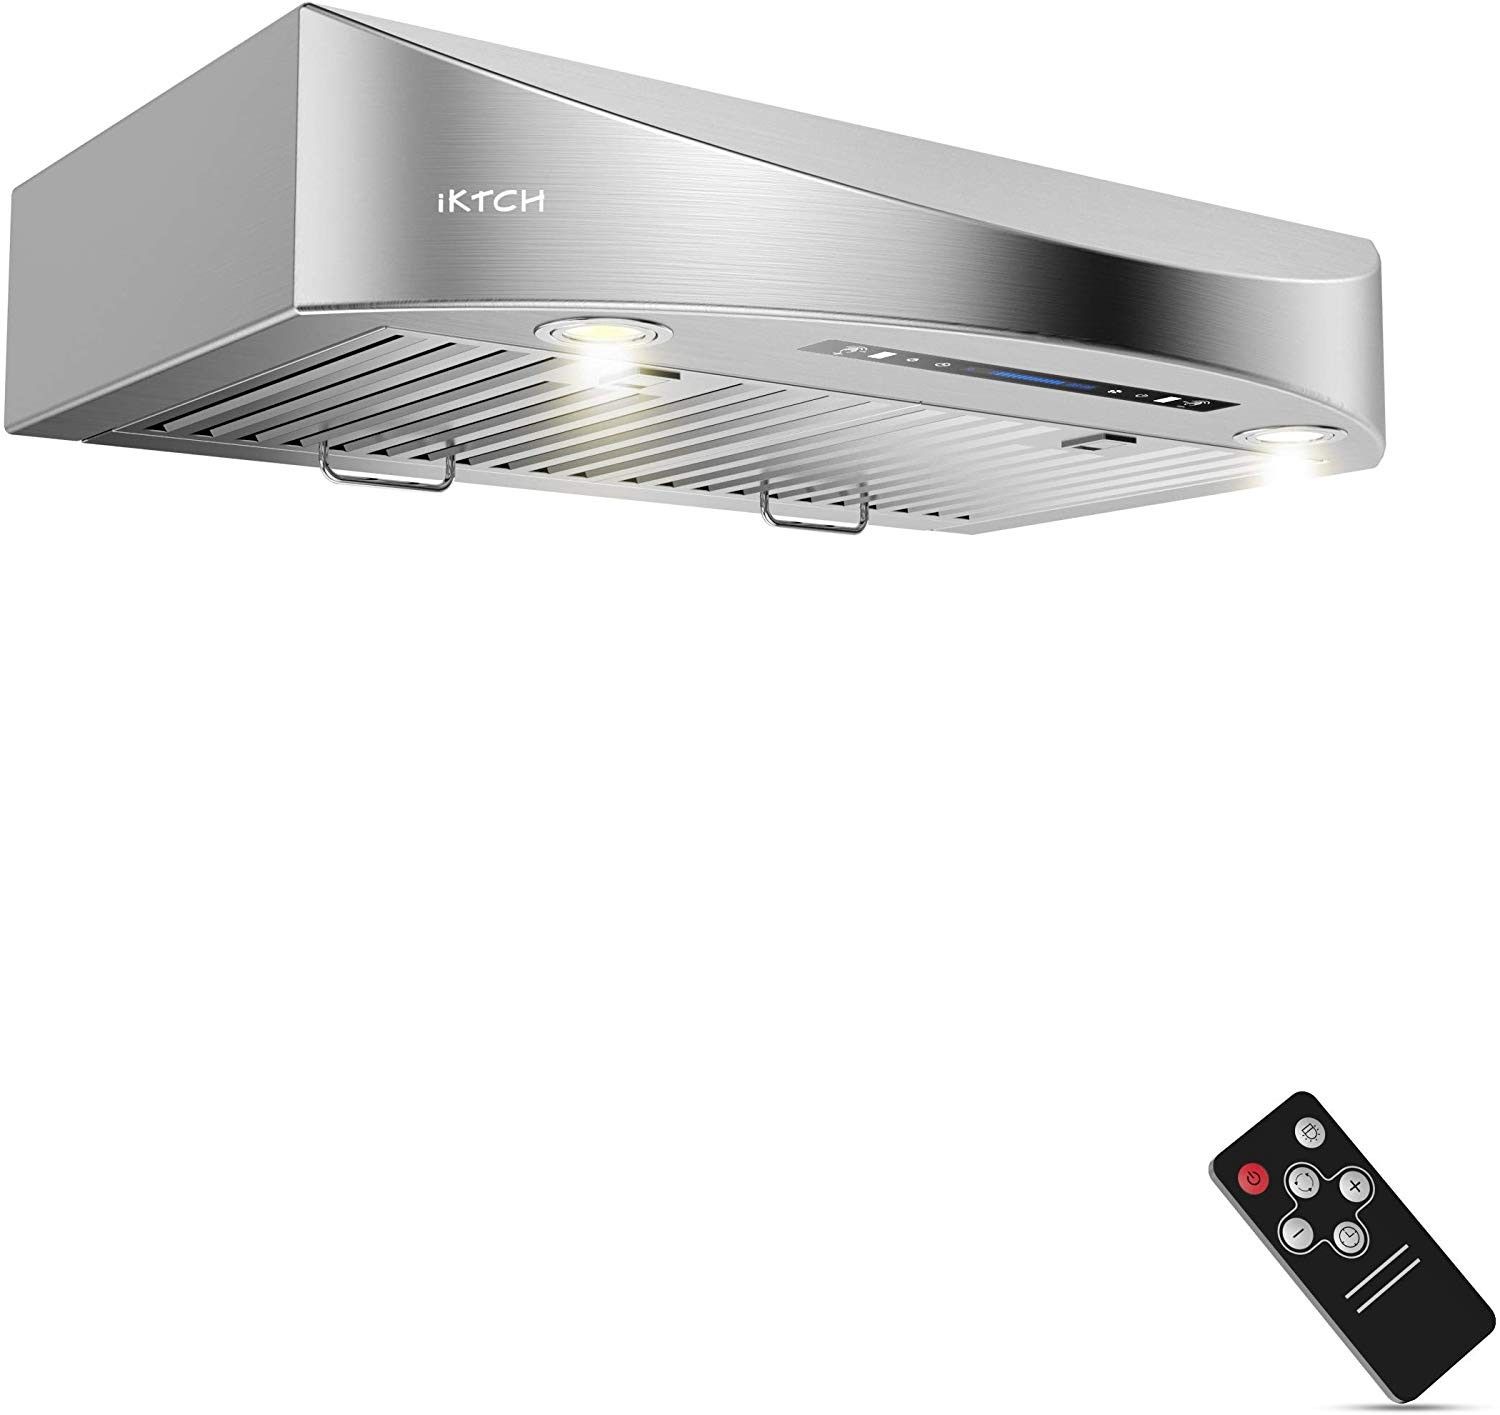 30 Inch Under Cabinet Range Hood 900-CFM, 4 Speed Gesture Sensing/Touch Control Switch Panel, Kitchen Stove Vent